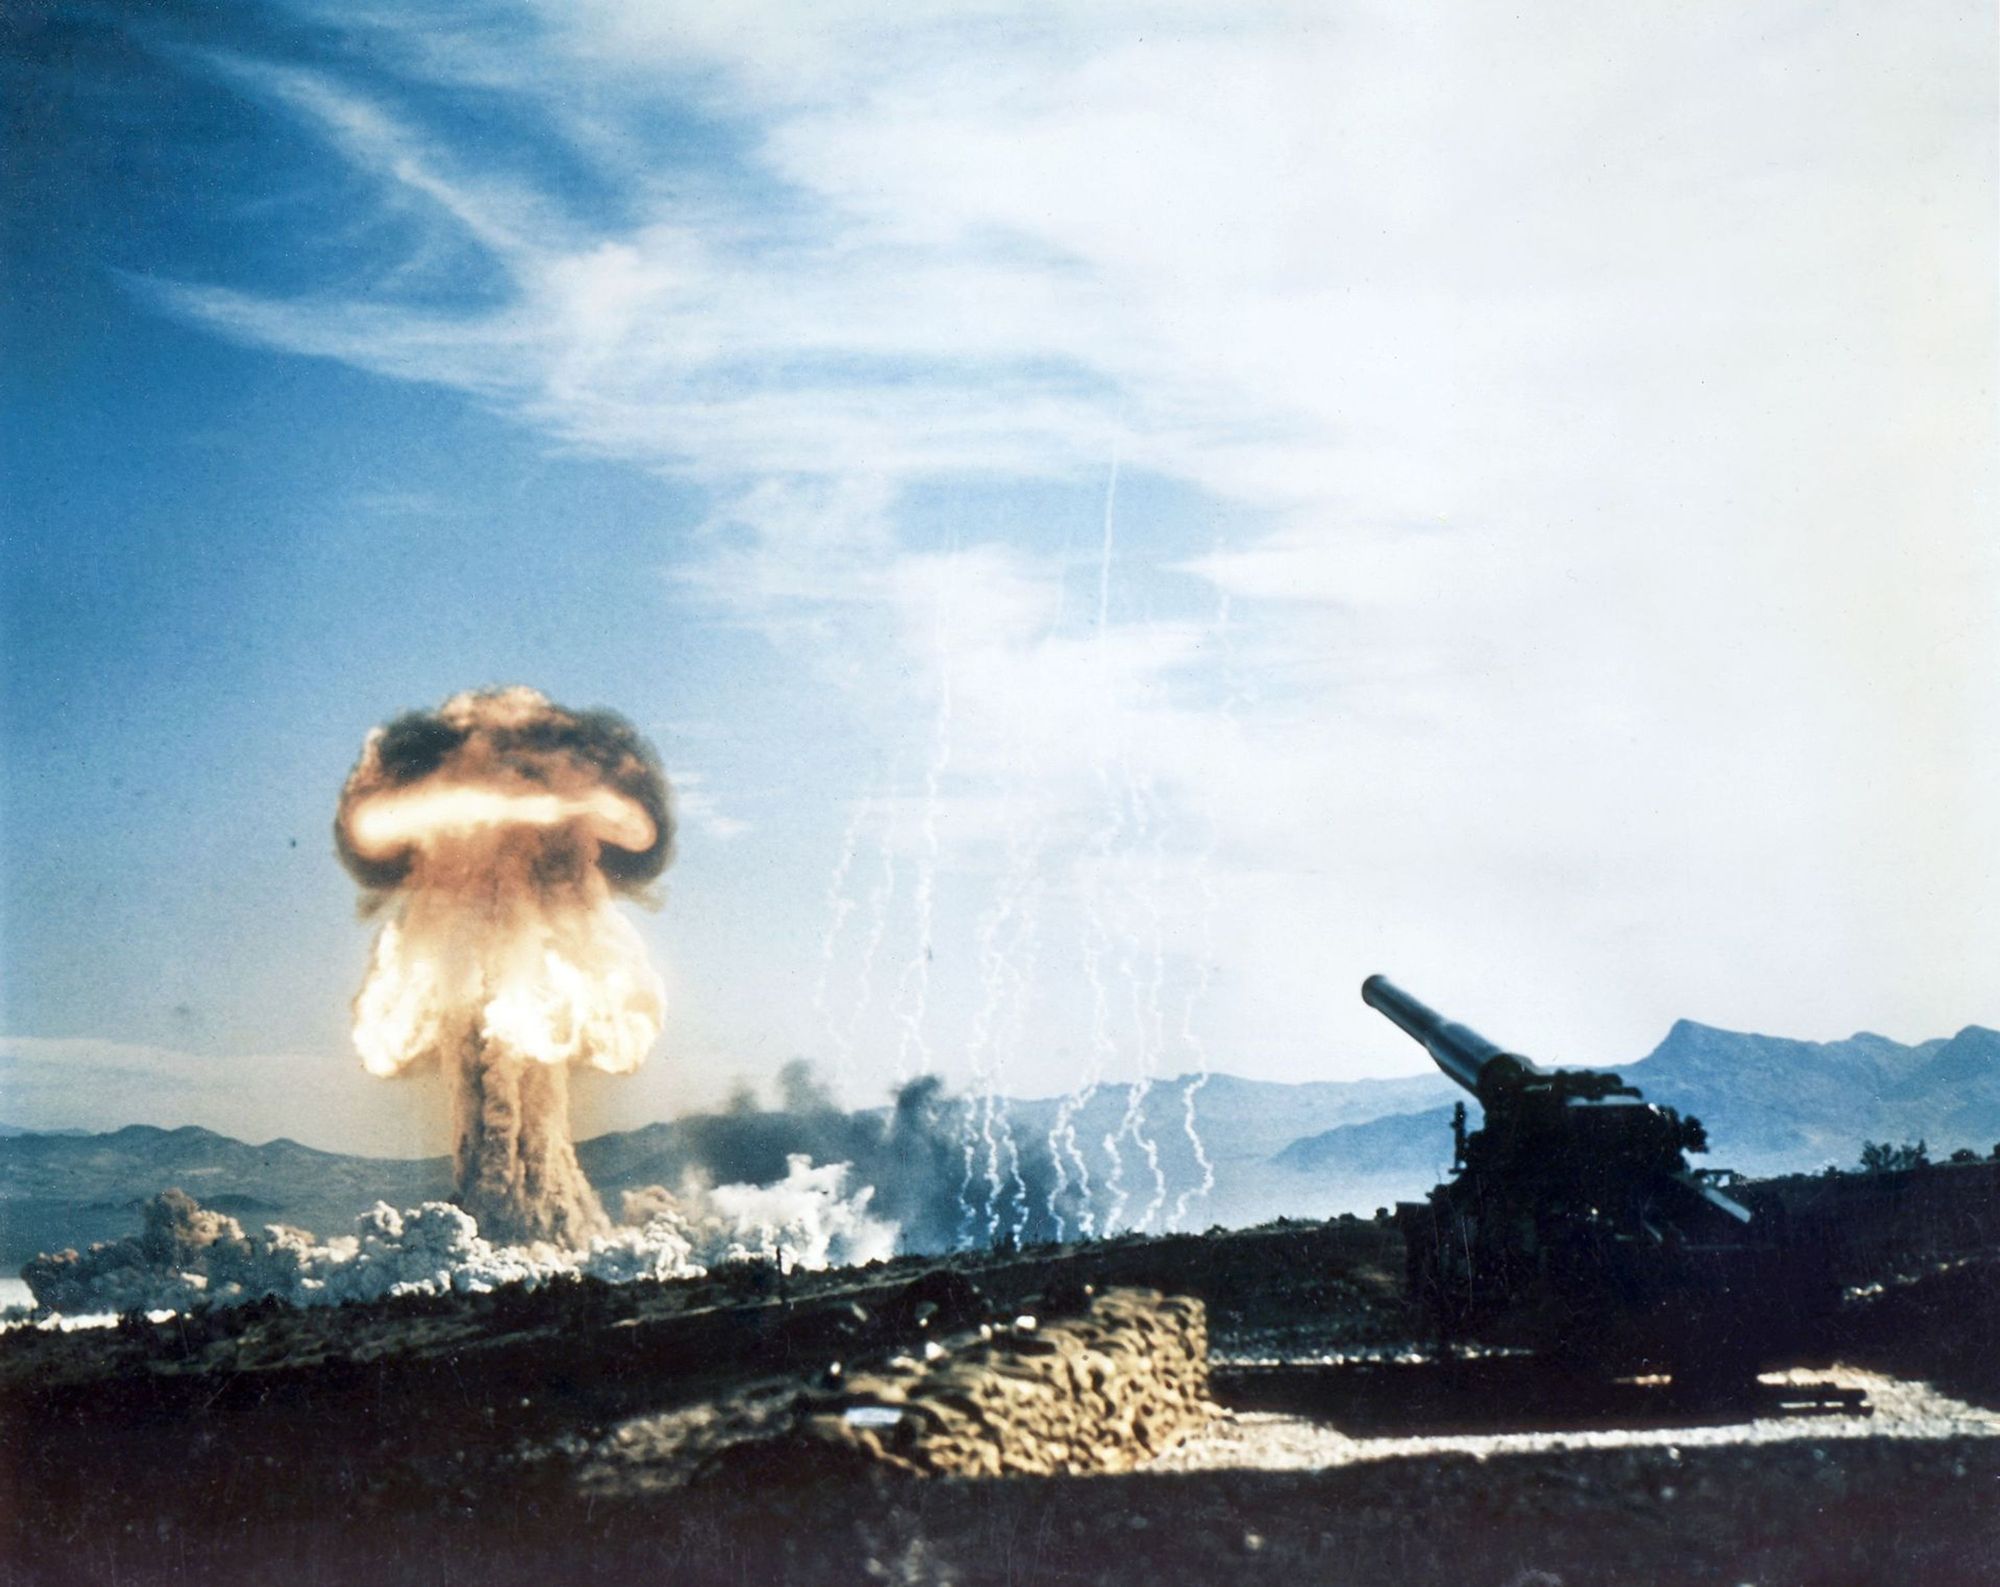 Photo of a mushroom cloud explosion from a tank